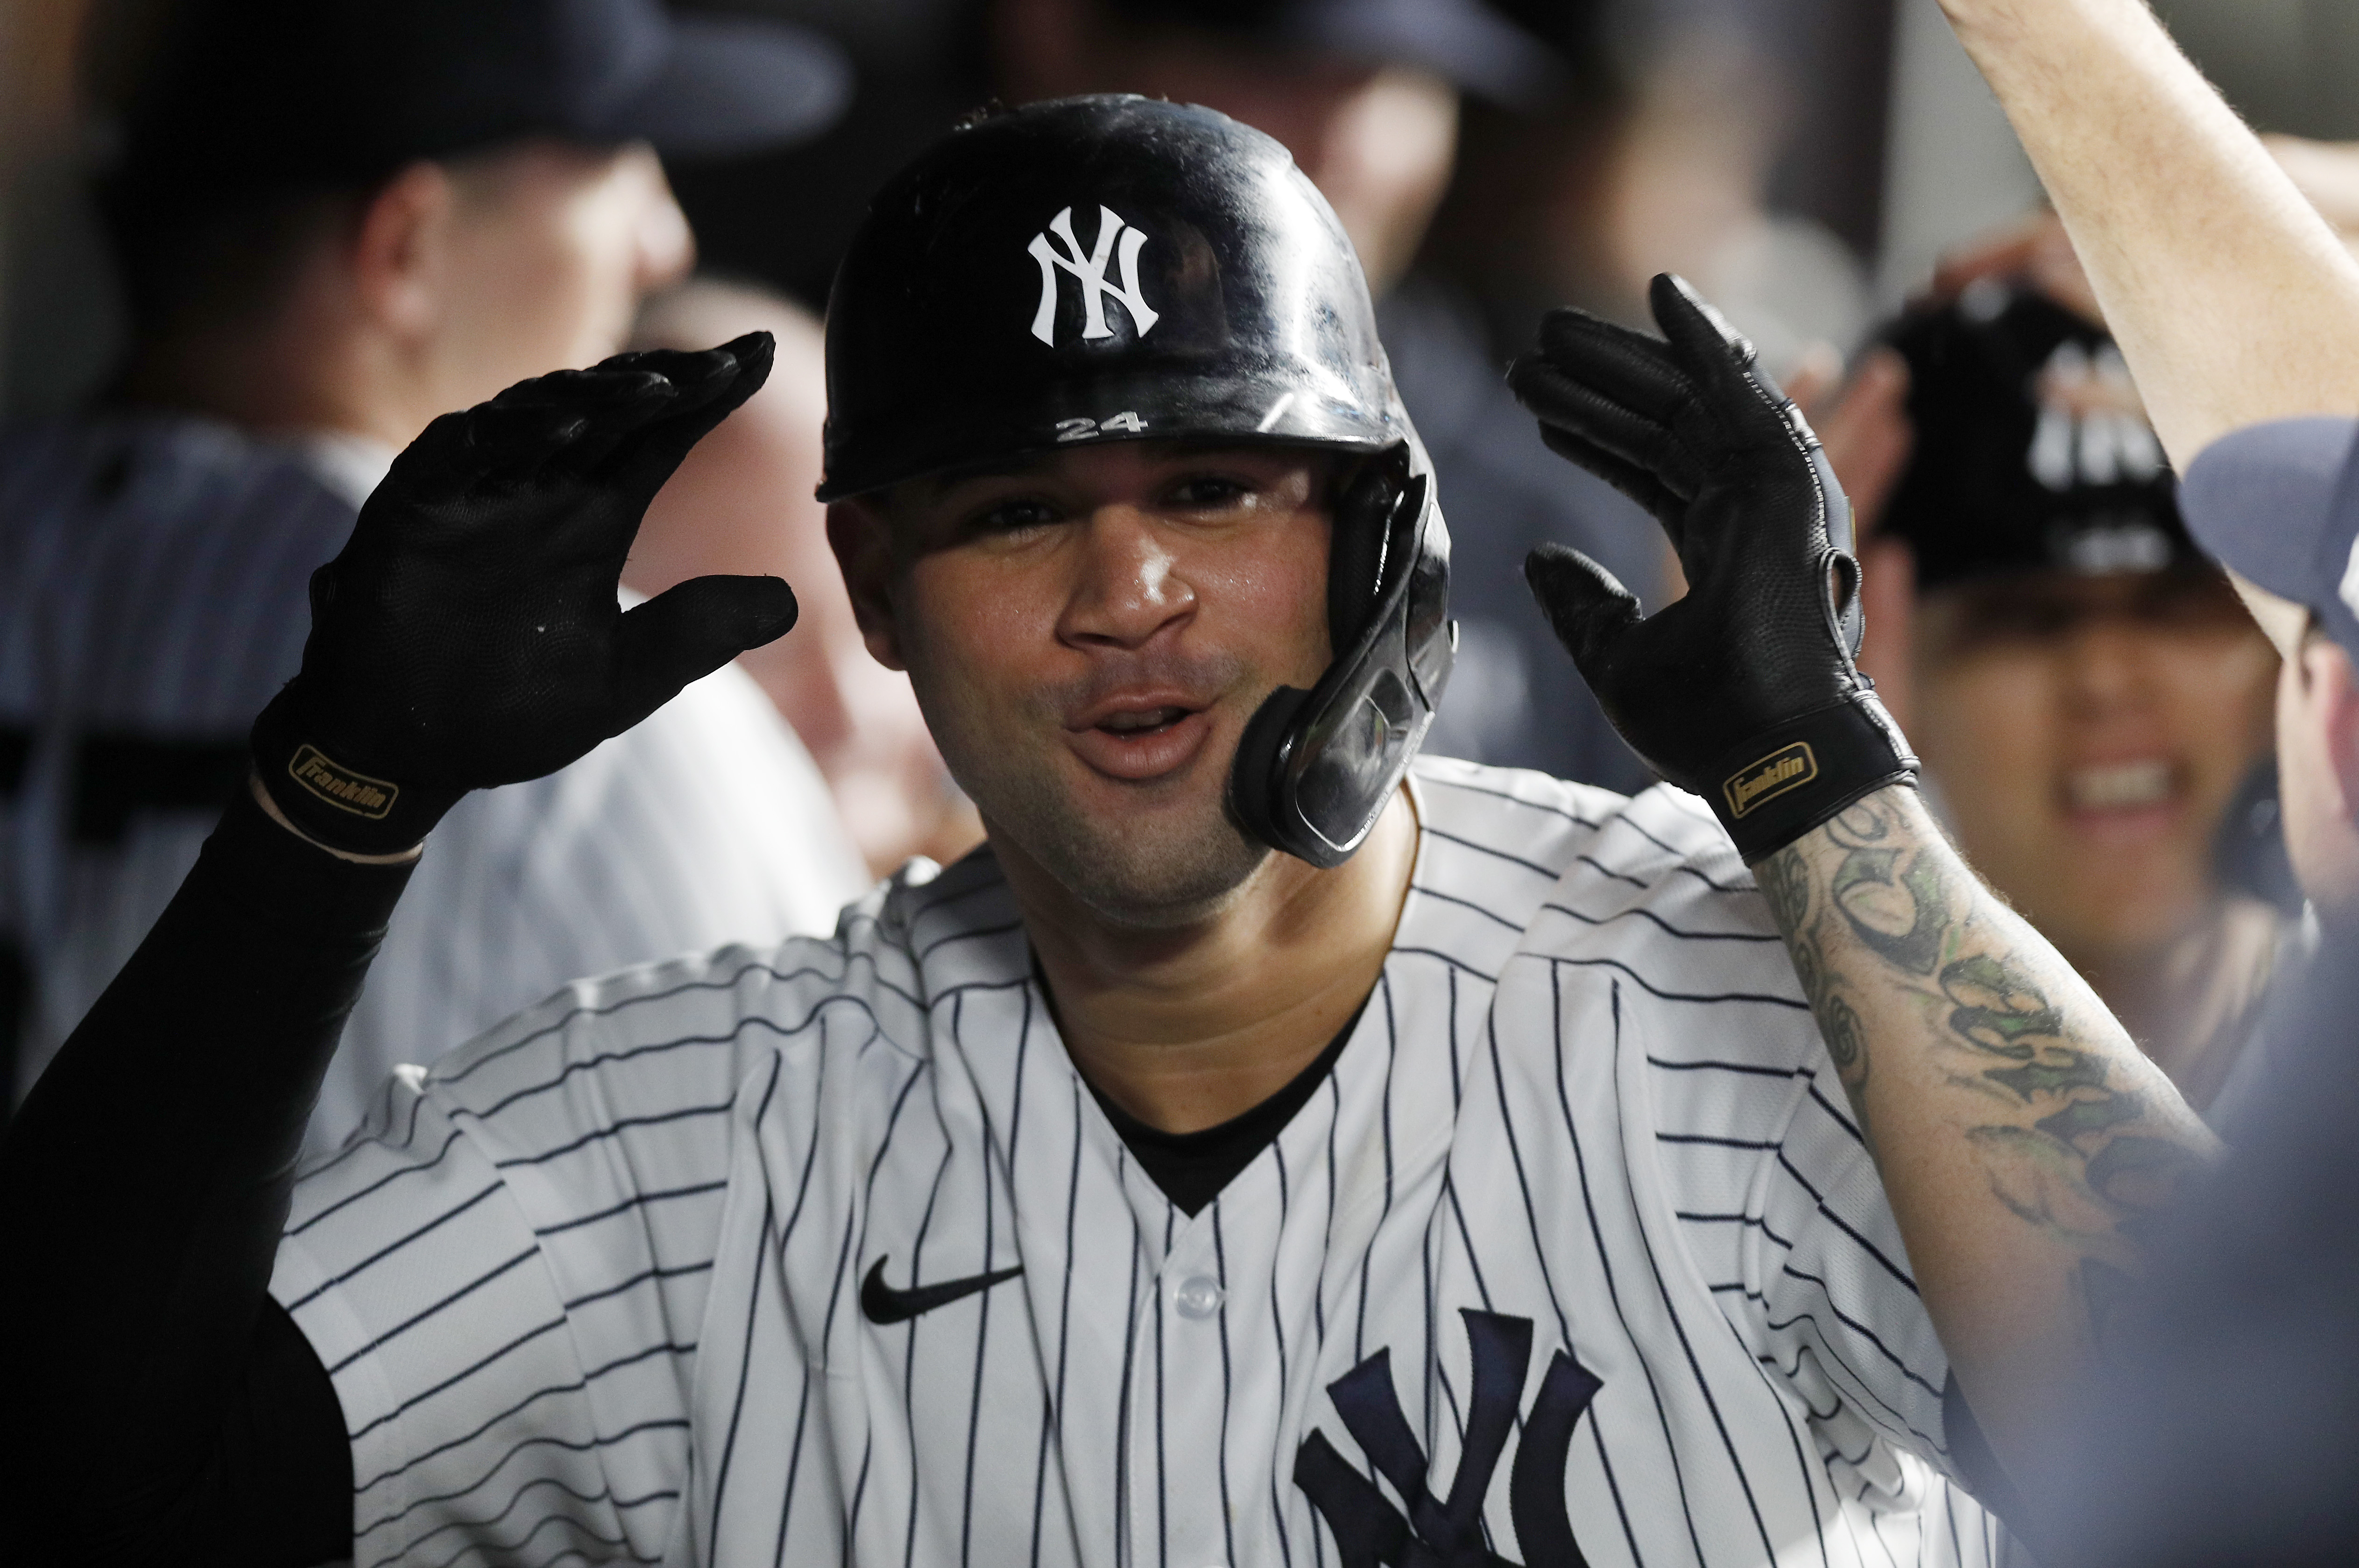 Yankees GM Brian Cashman suggests Kyle Higashioka could replace